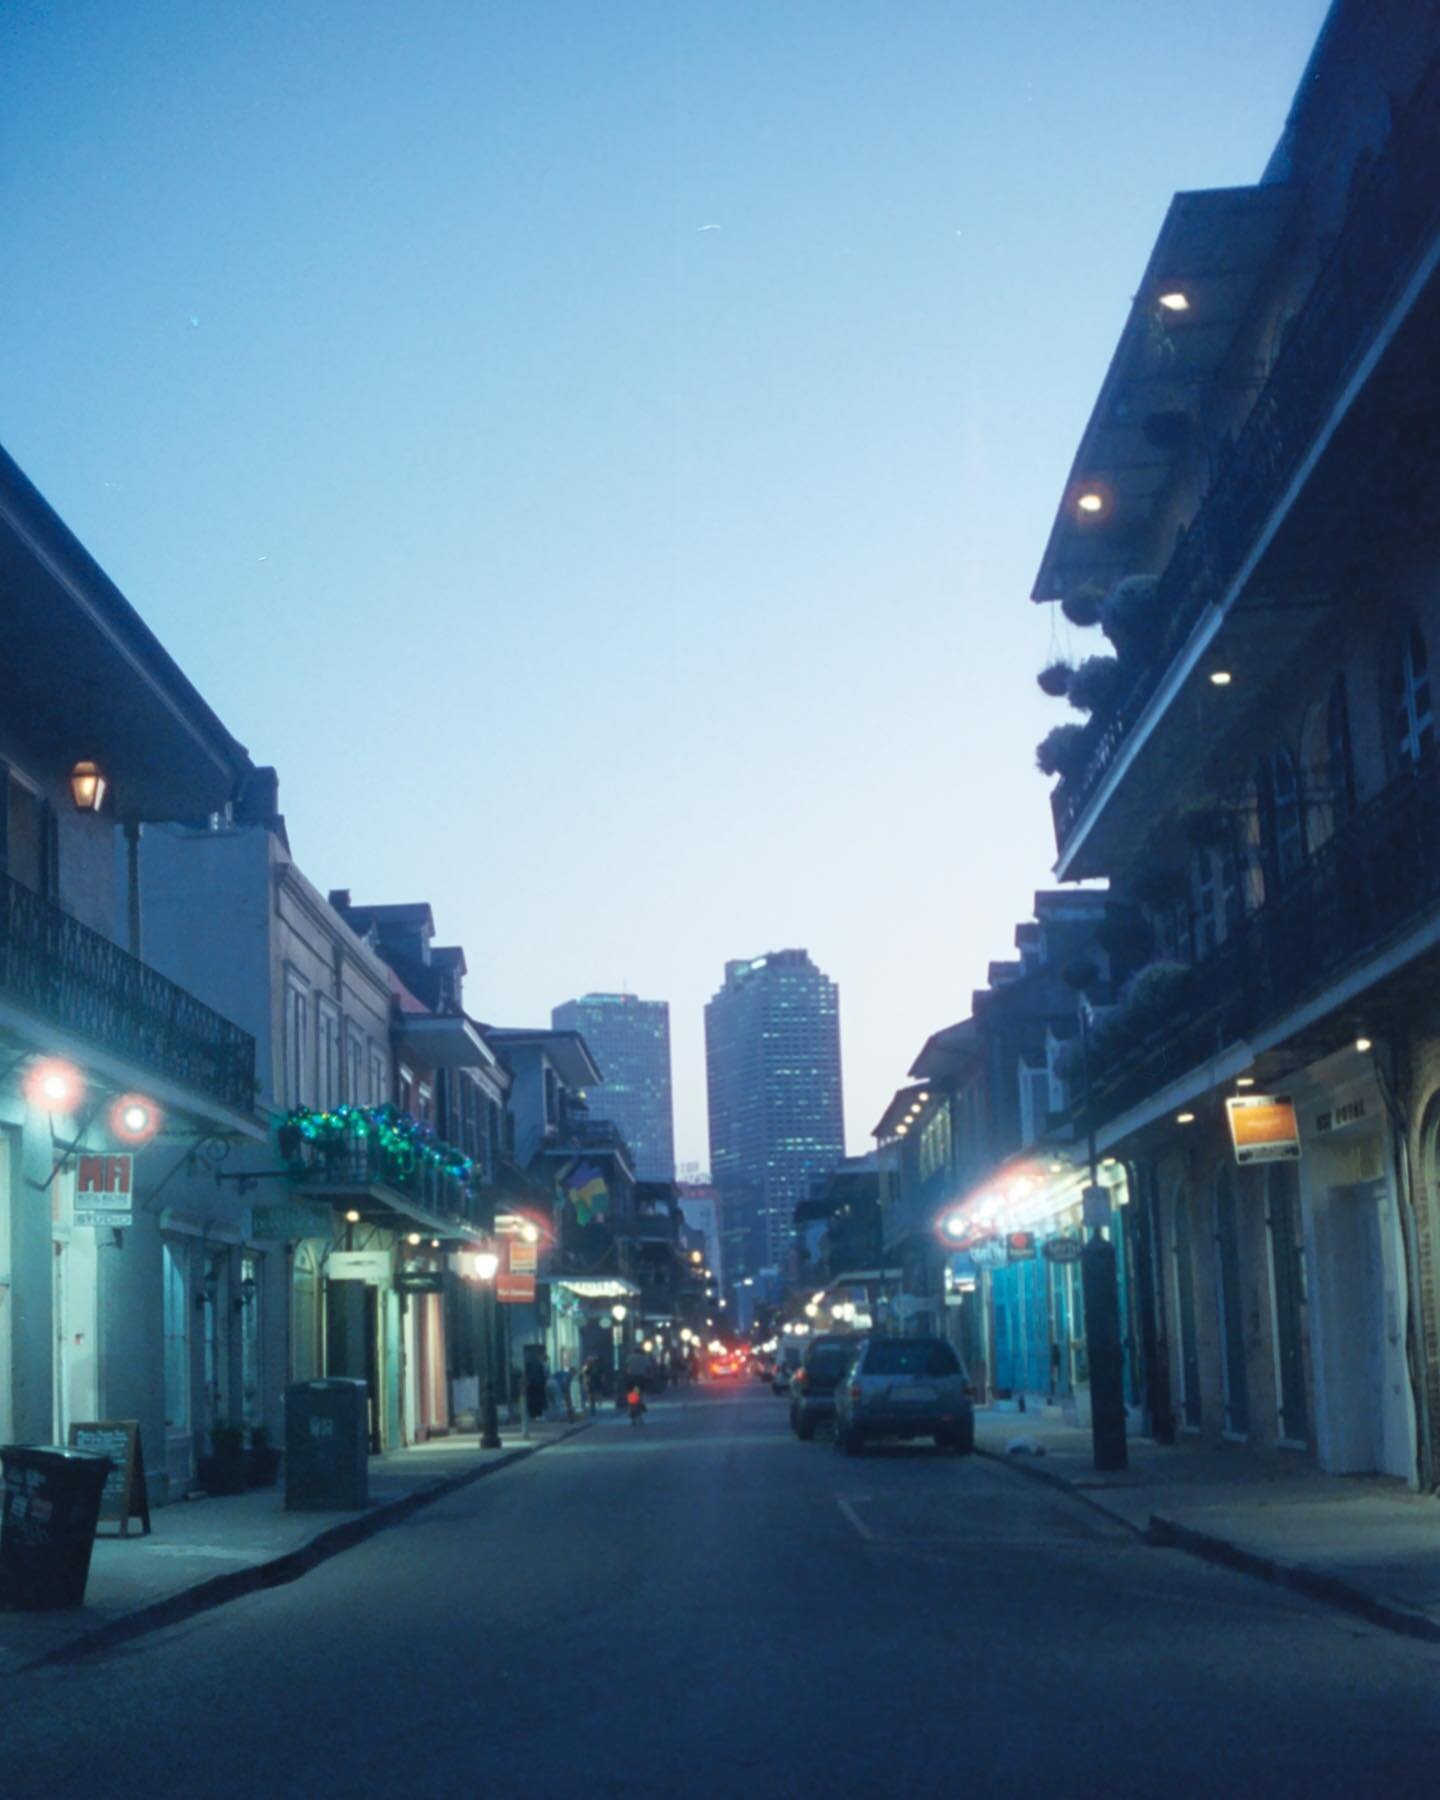 New Orleans on a quiet Tuesday night, even after Mardi Gras #konicahexaraf #cinestill800t